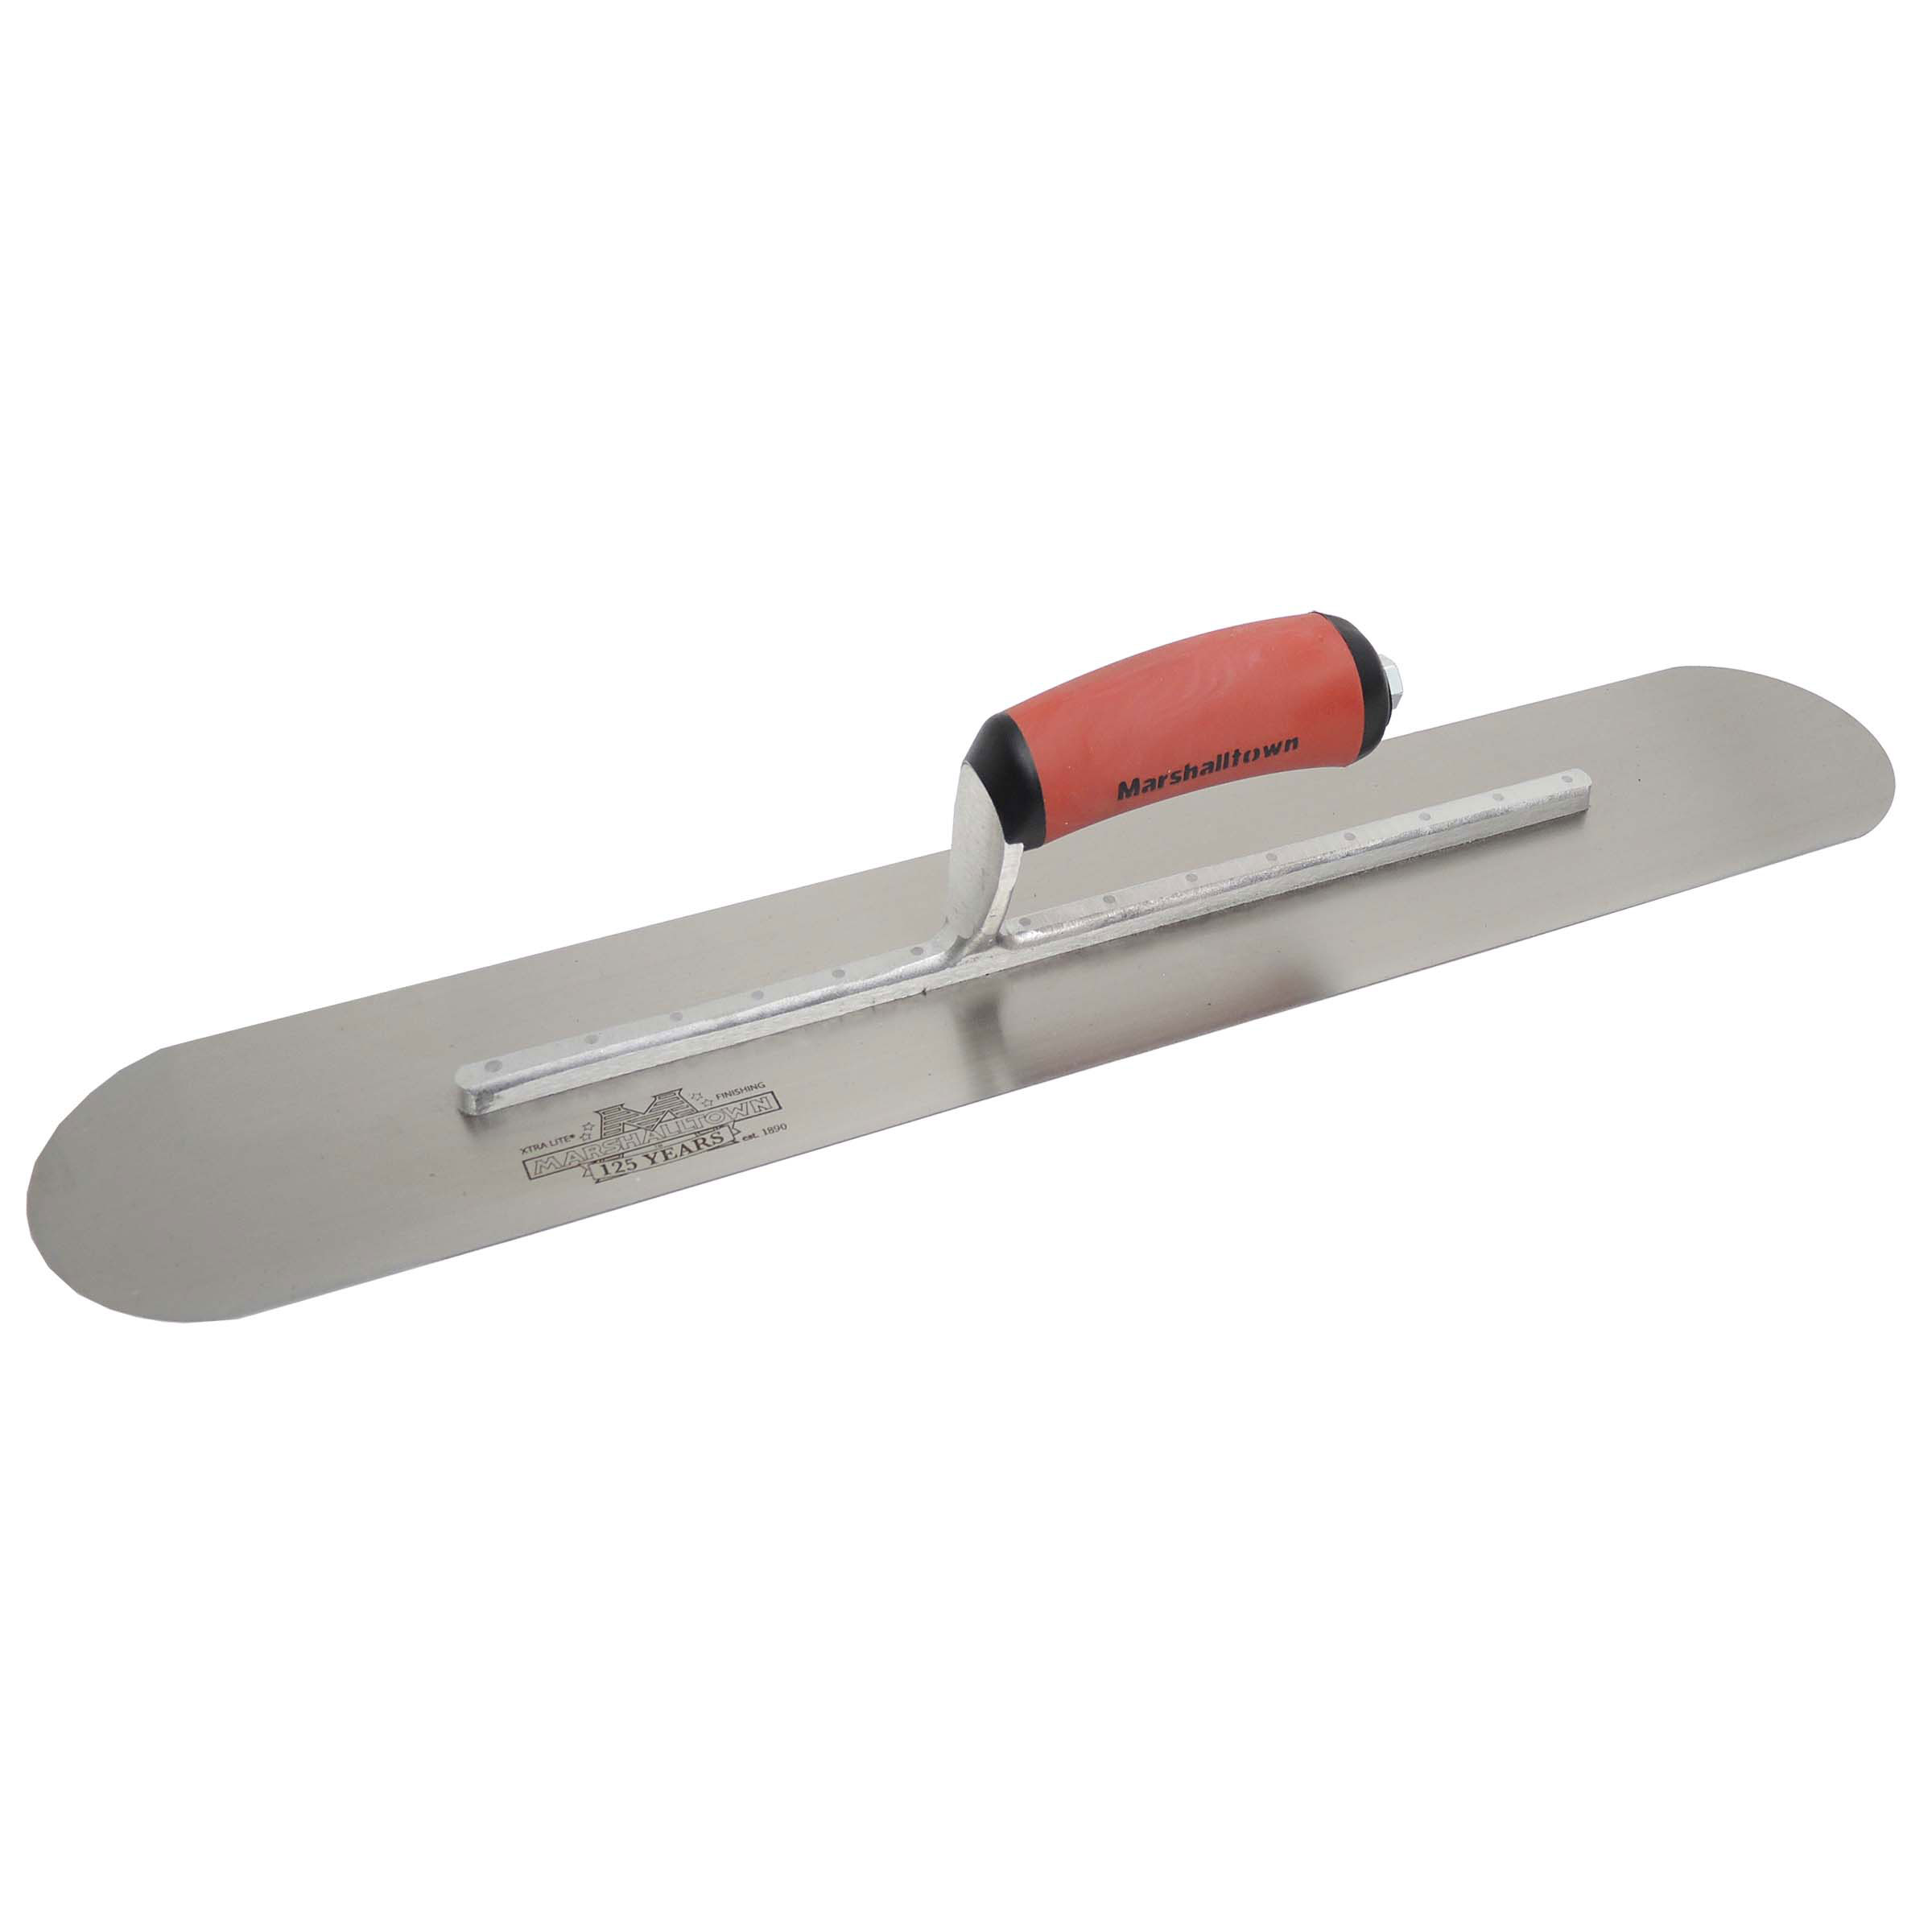 Marshalltown SP225D 22in x 5in Pool Trowel with Durasoft Handle SP225D